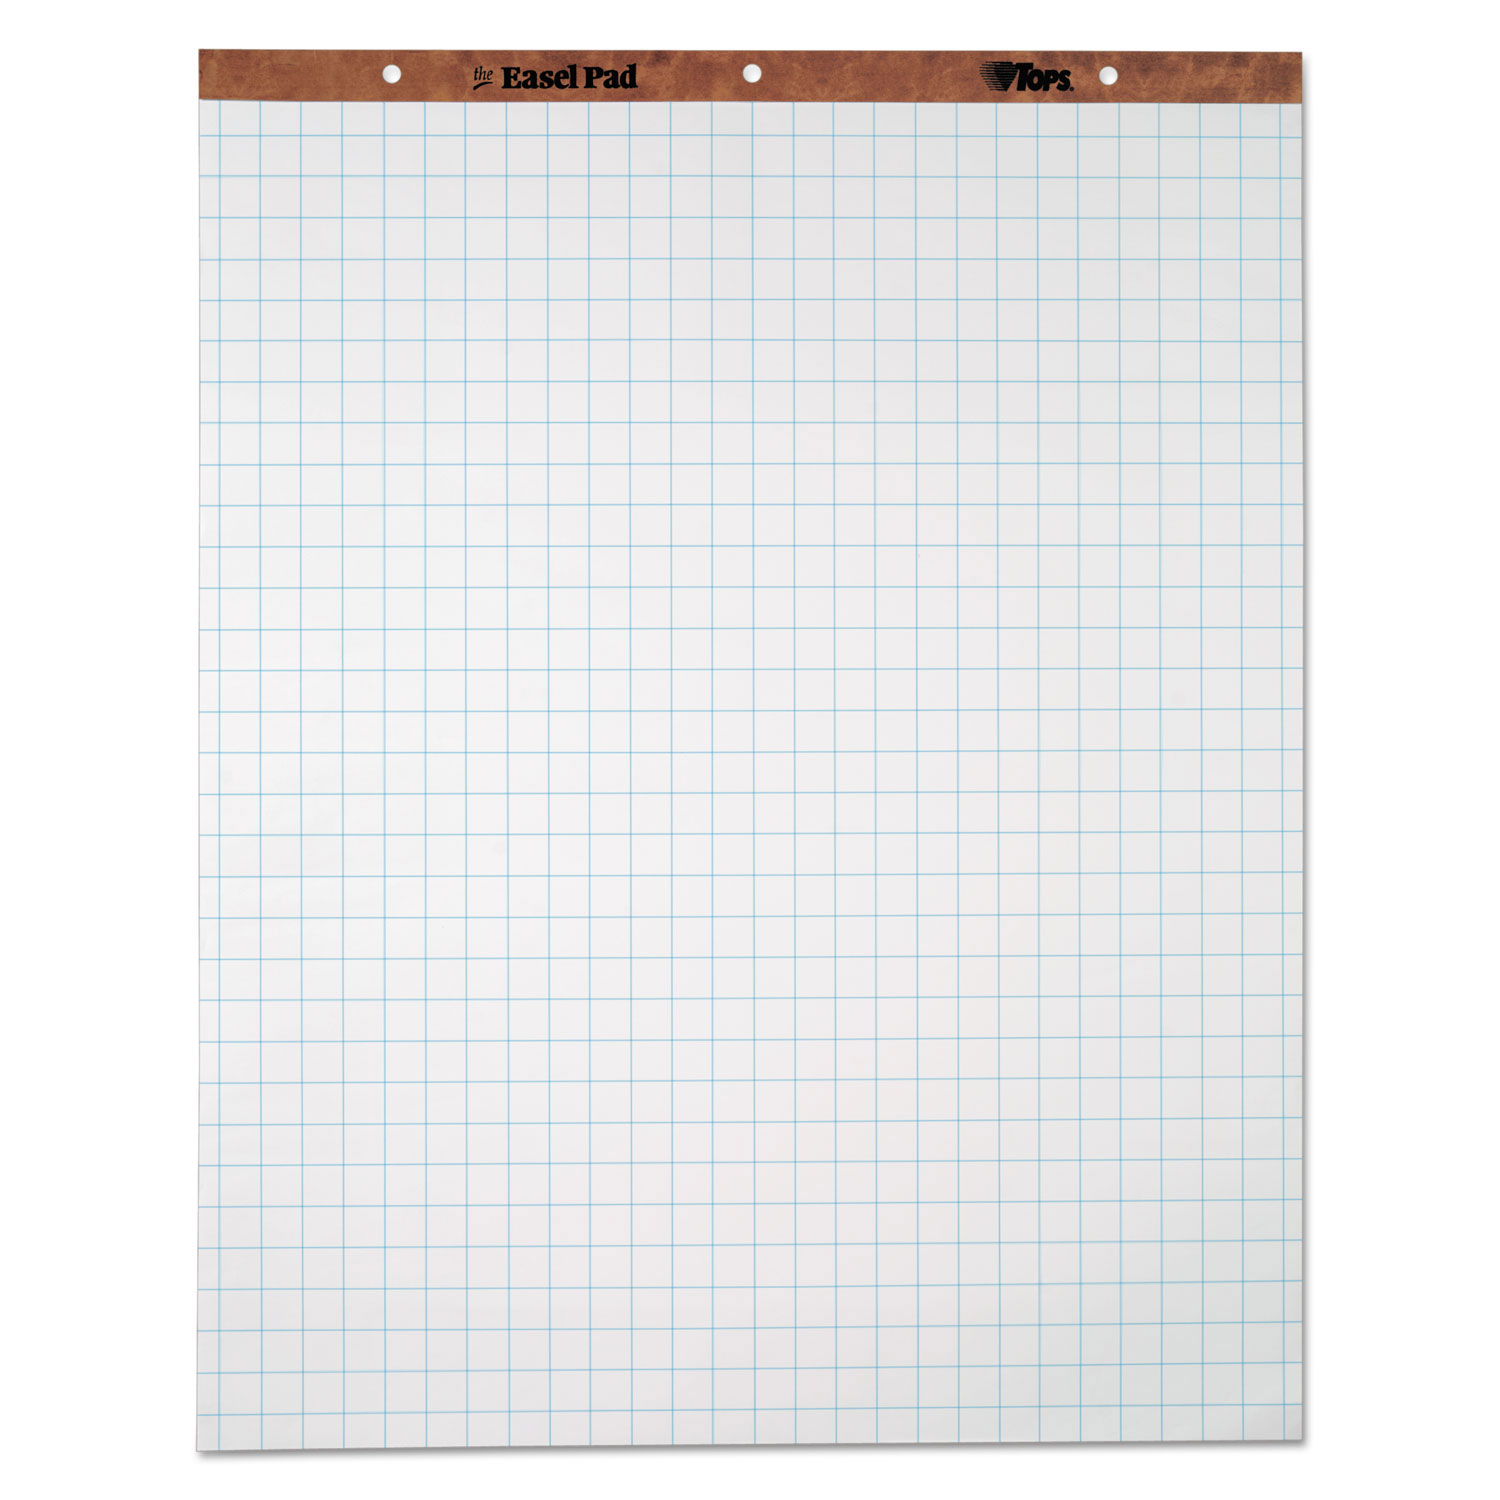 TOPS Easel Pads Quadrille Rule 1 sq/in 50 White 27 x 34 Sheets 4/Carton